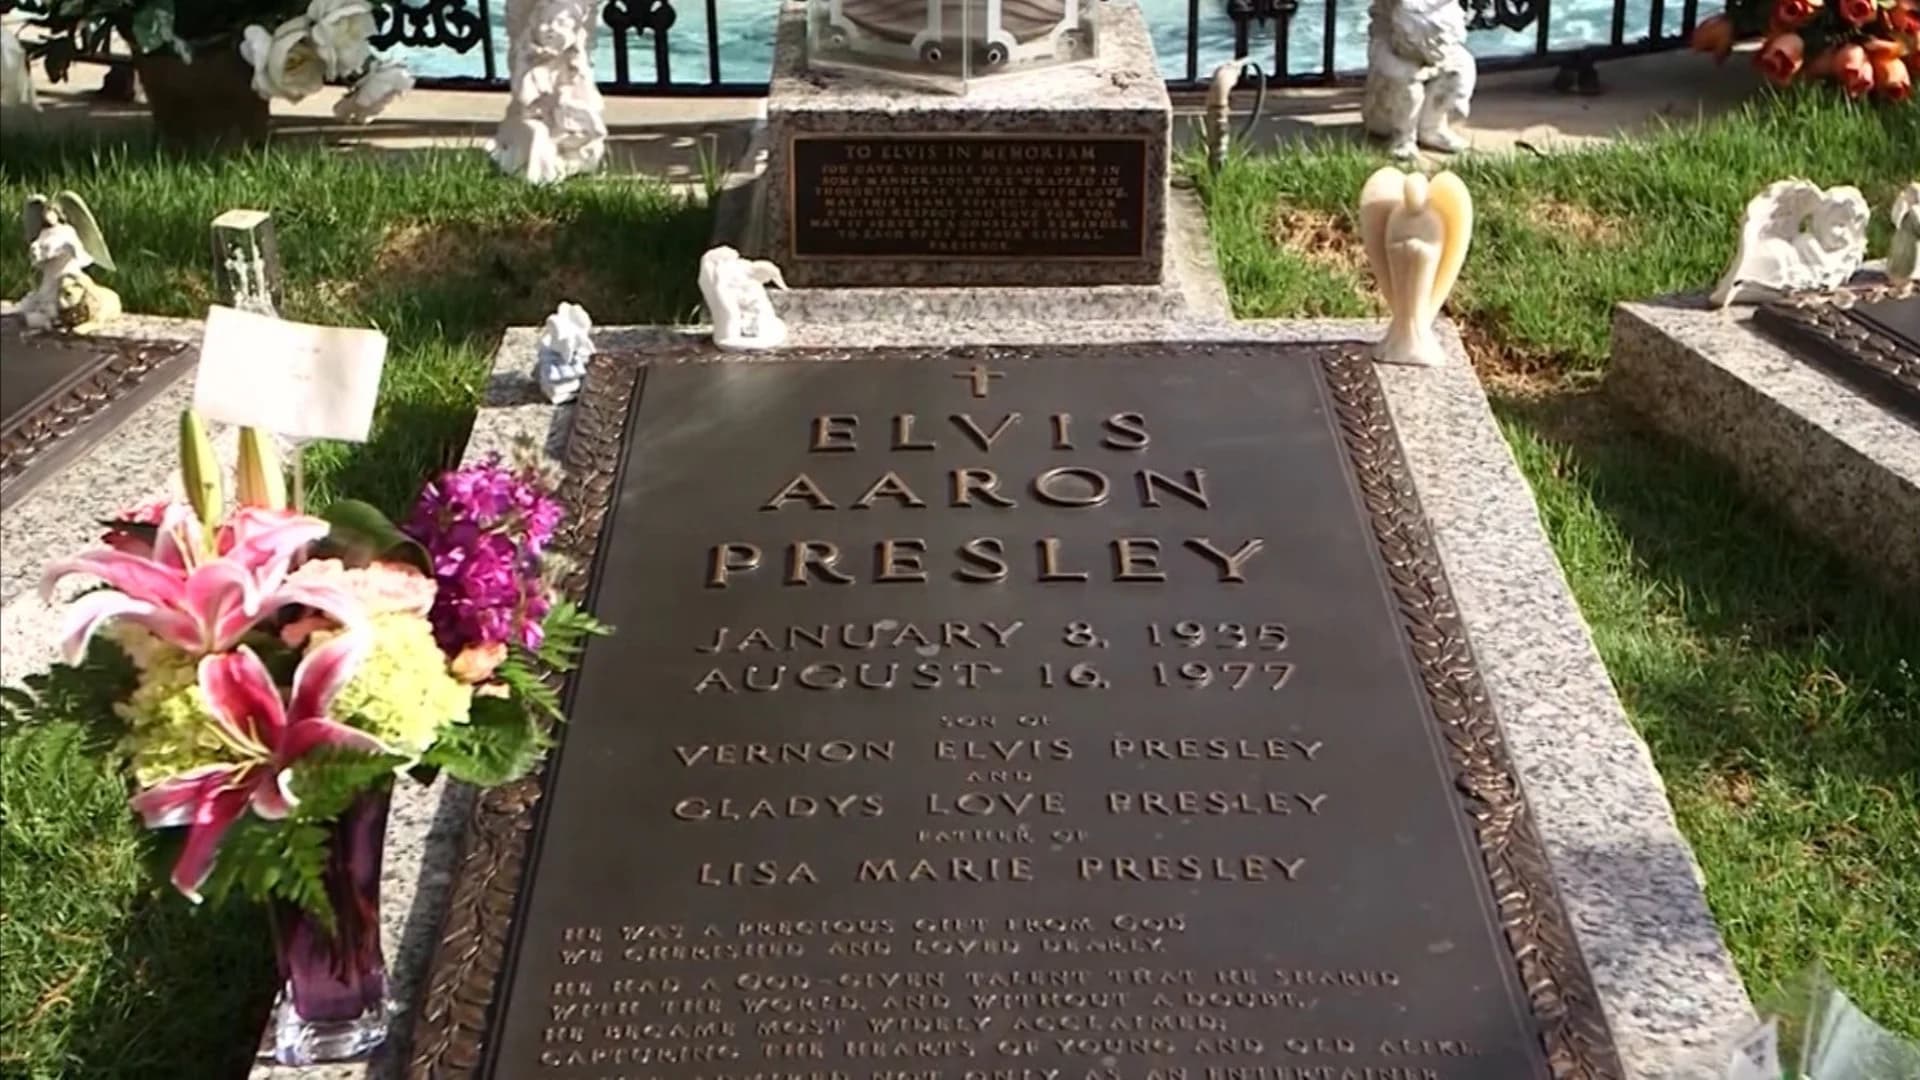 Today marks 40 years since death of Elvis Presley